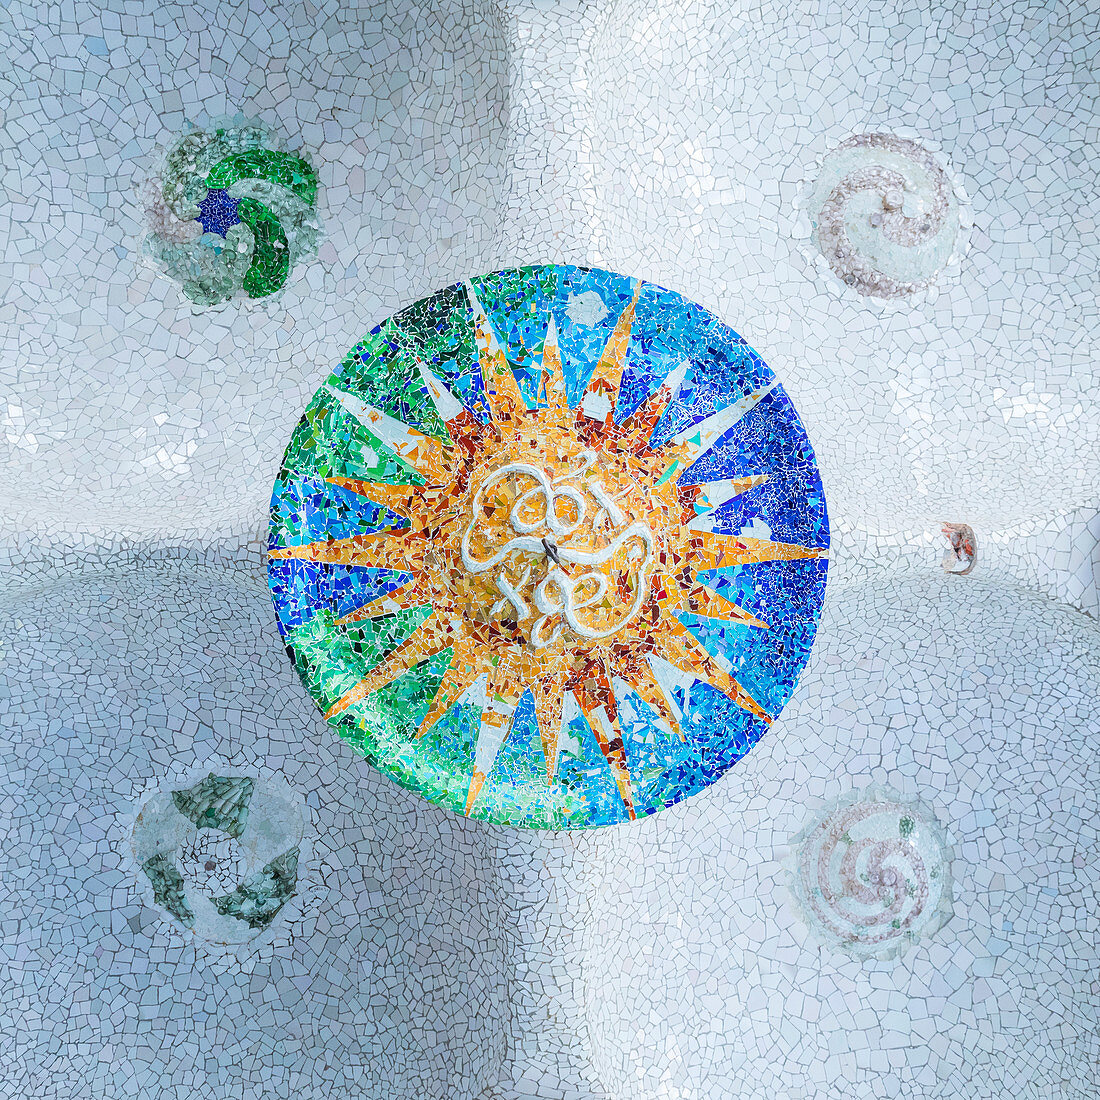 Mosaic on the ceiling of Sala Hipostila in Park Guell, Barcelona